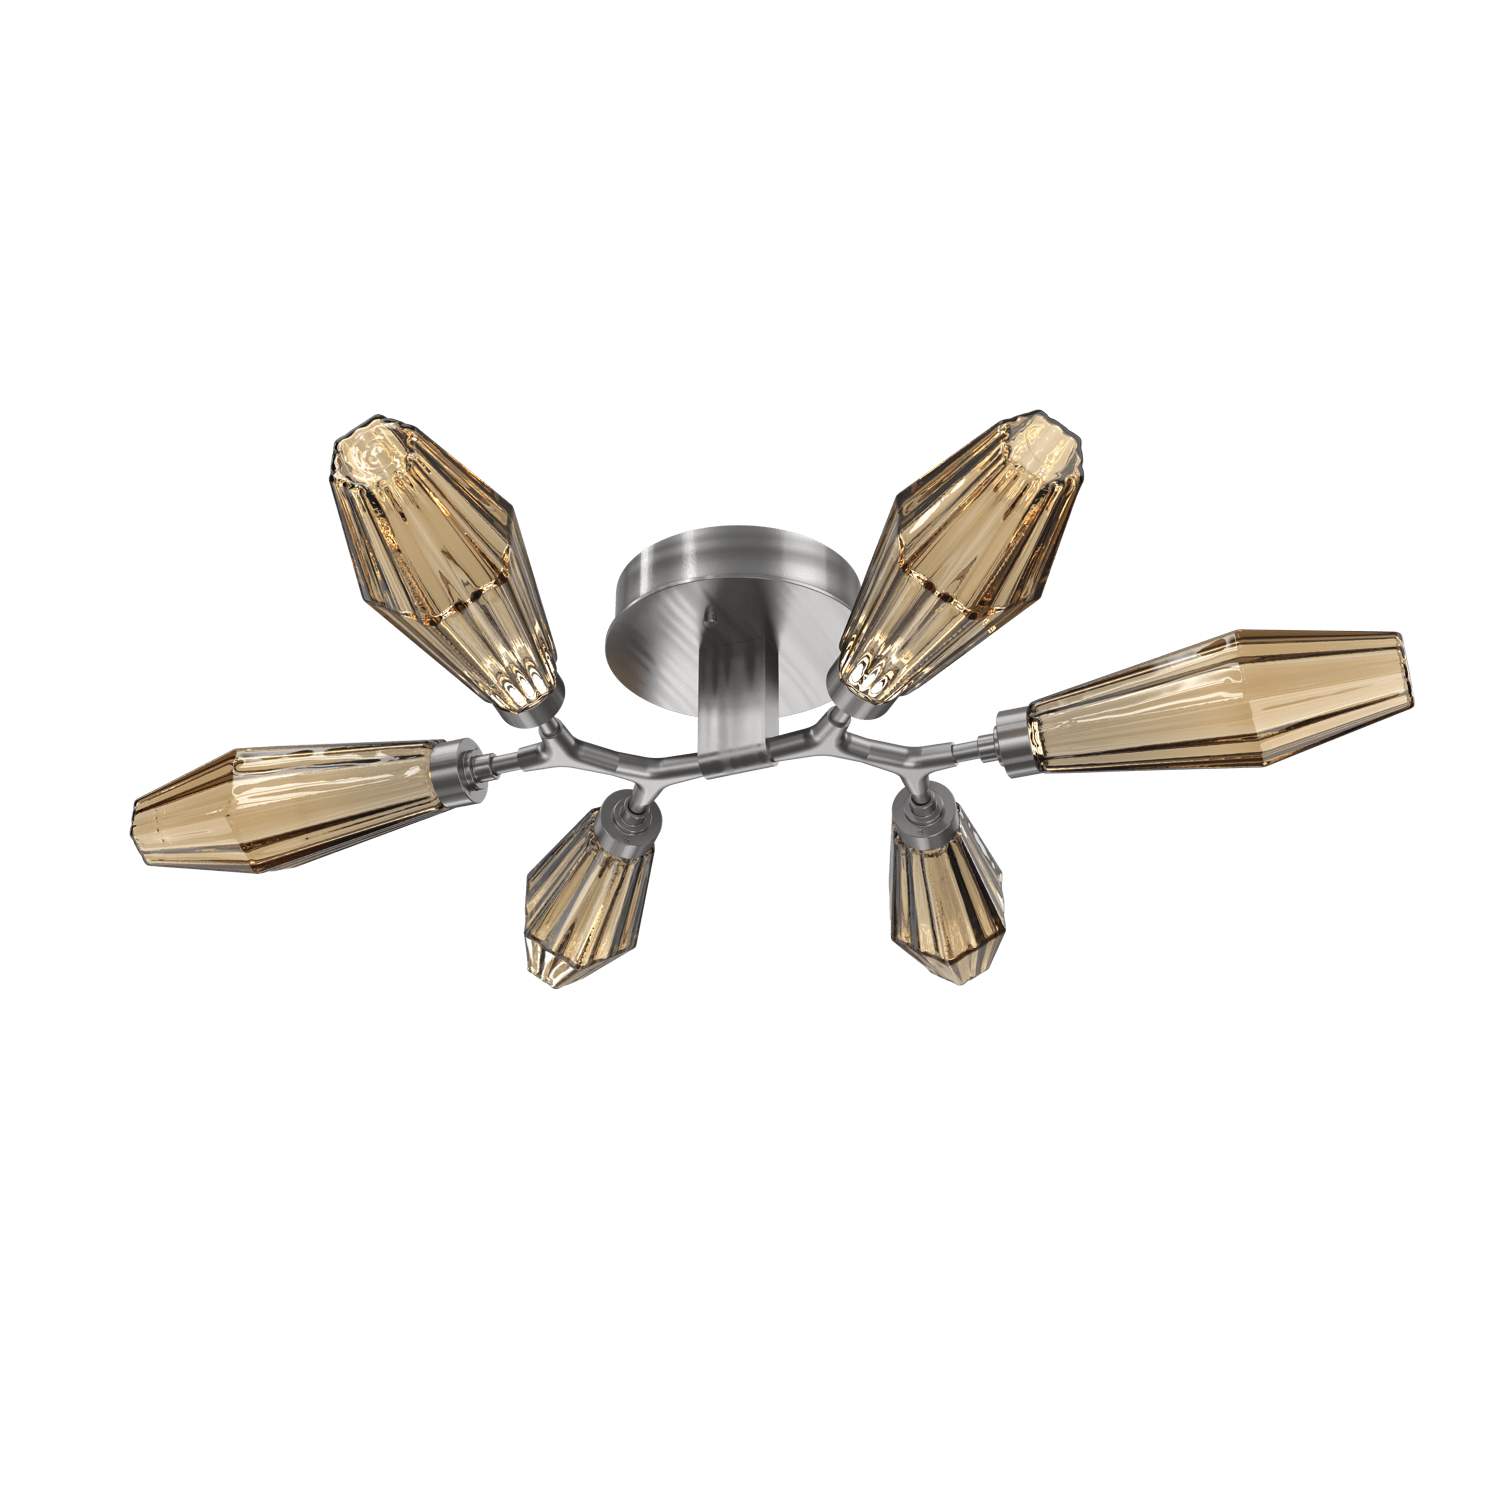 CLB0049-01-SN-RB-Hammerton-Studio-Aalto-6-light-organic-flush-mount-light-with-satin-nickel-finish-and-optic-ribbed-bronze-glass-shades-and-LED-lamping